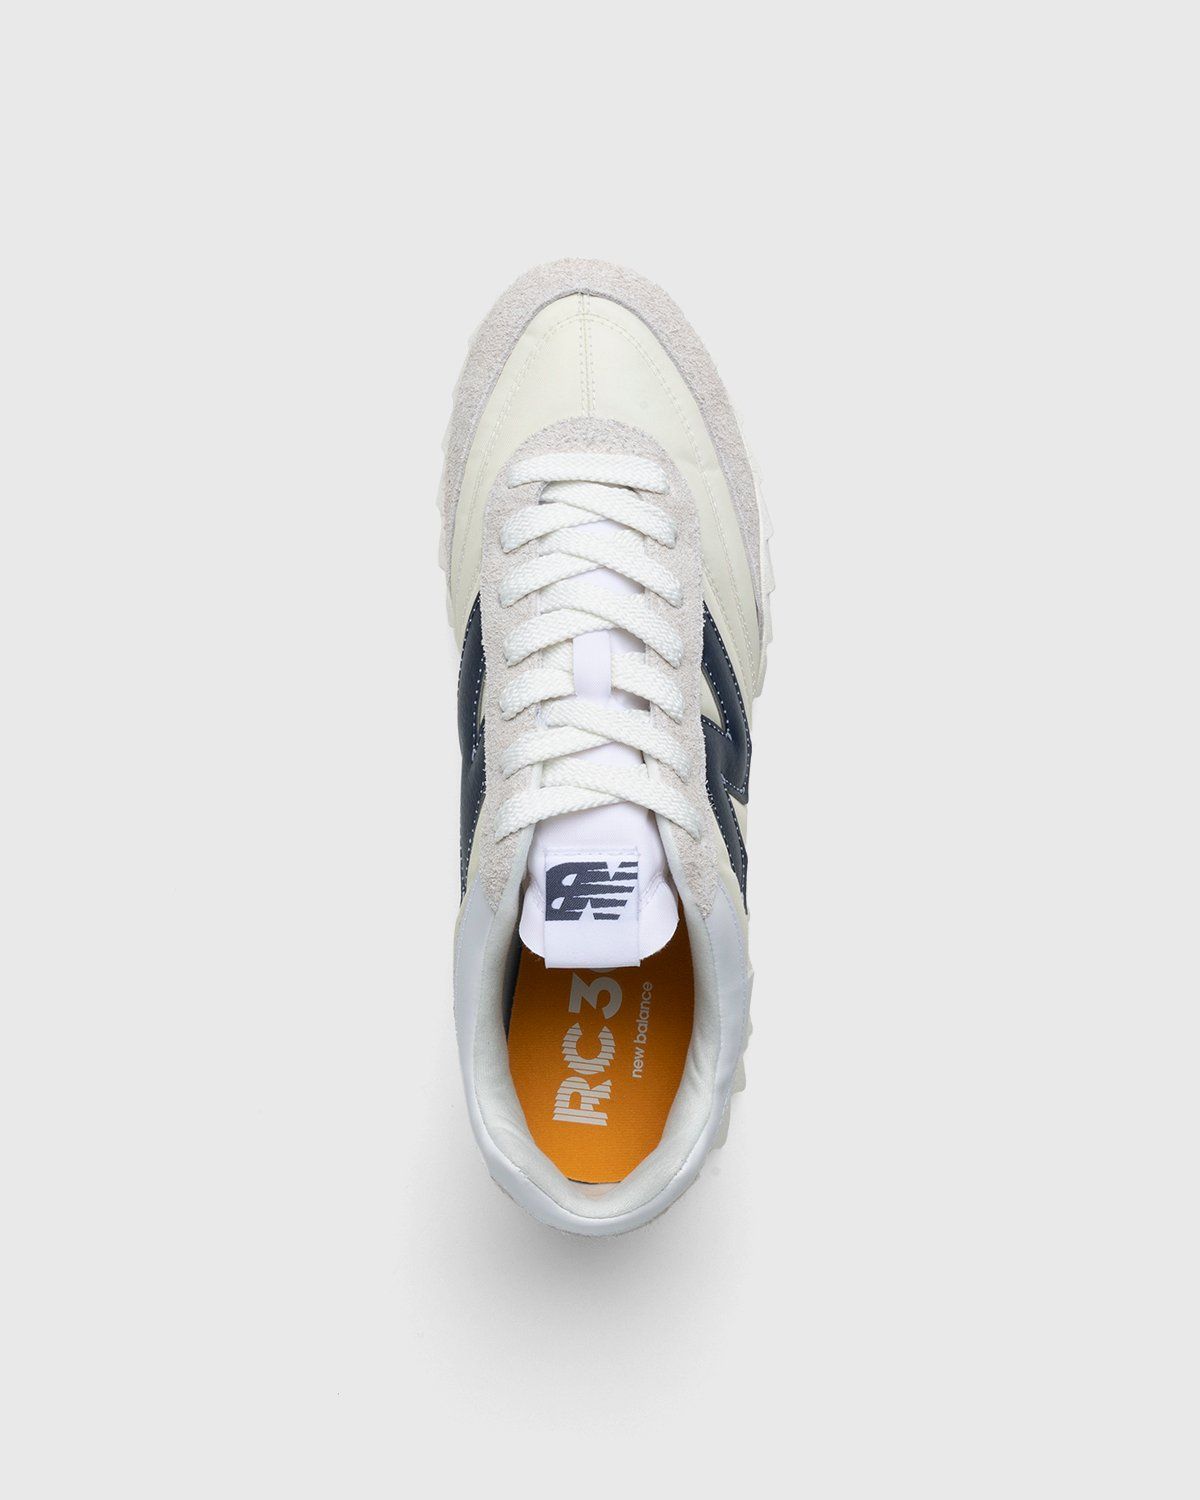 Donald Glover x New Balance – URC30DD Sea Salt - Low Top Sneakers - White - Image 6